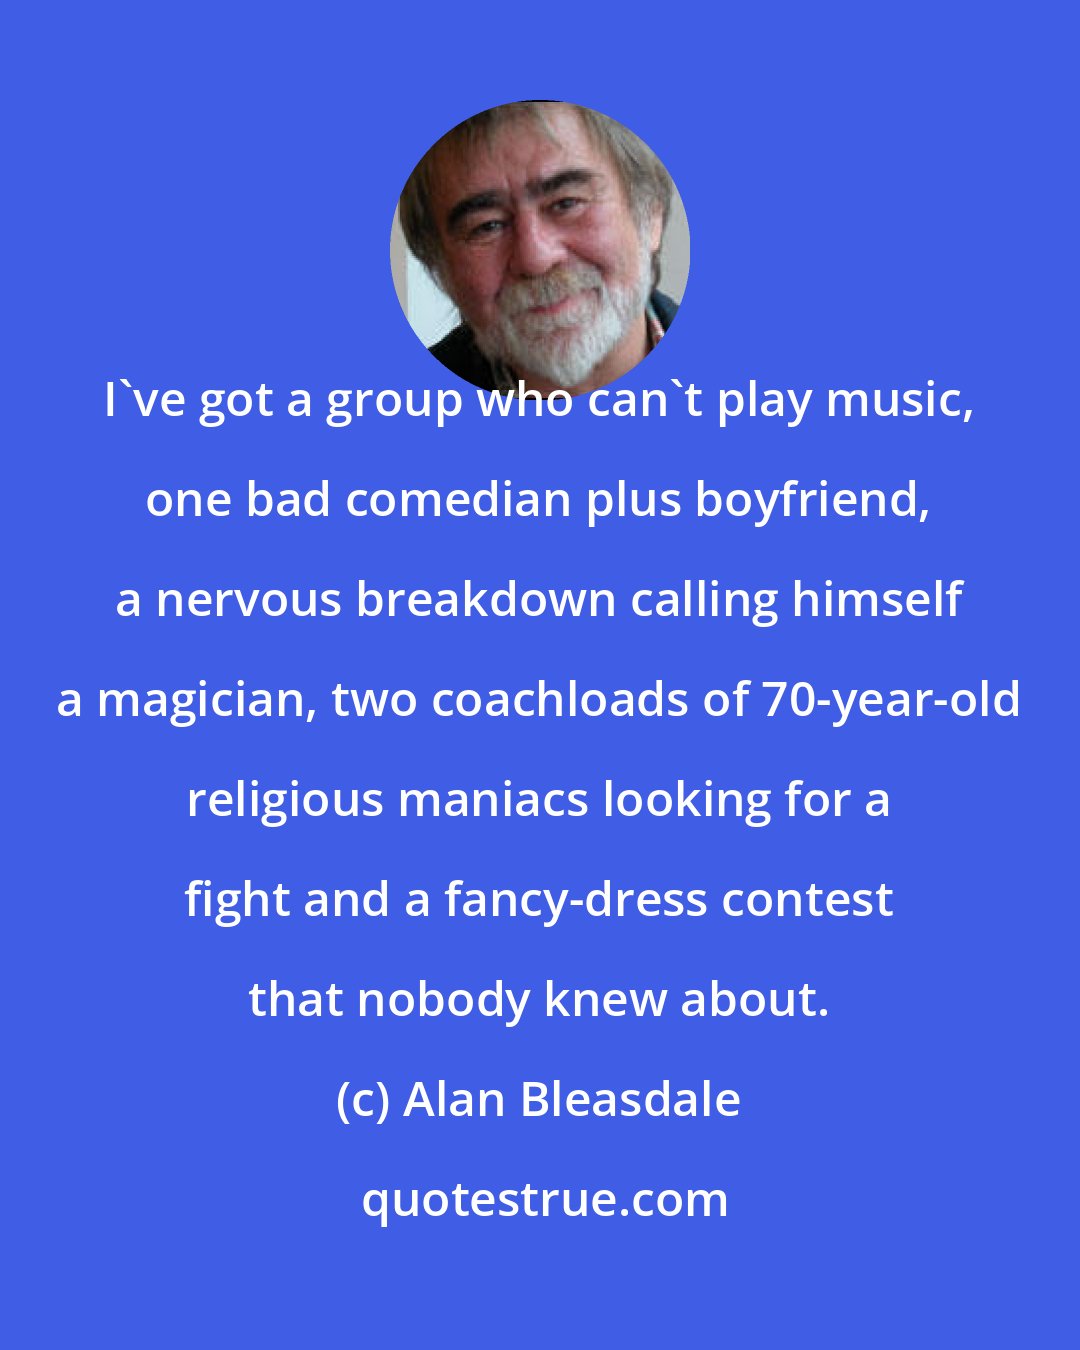 Alan Bleasdale: I've got a group who can't play music, one bad comedian plus boyfriend, a nervous breakdown calling himself a magician, two coachloads of 70-year-old religious maniacs looking for a fight and a fancy-dress contest that nobody knew about.